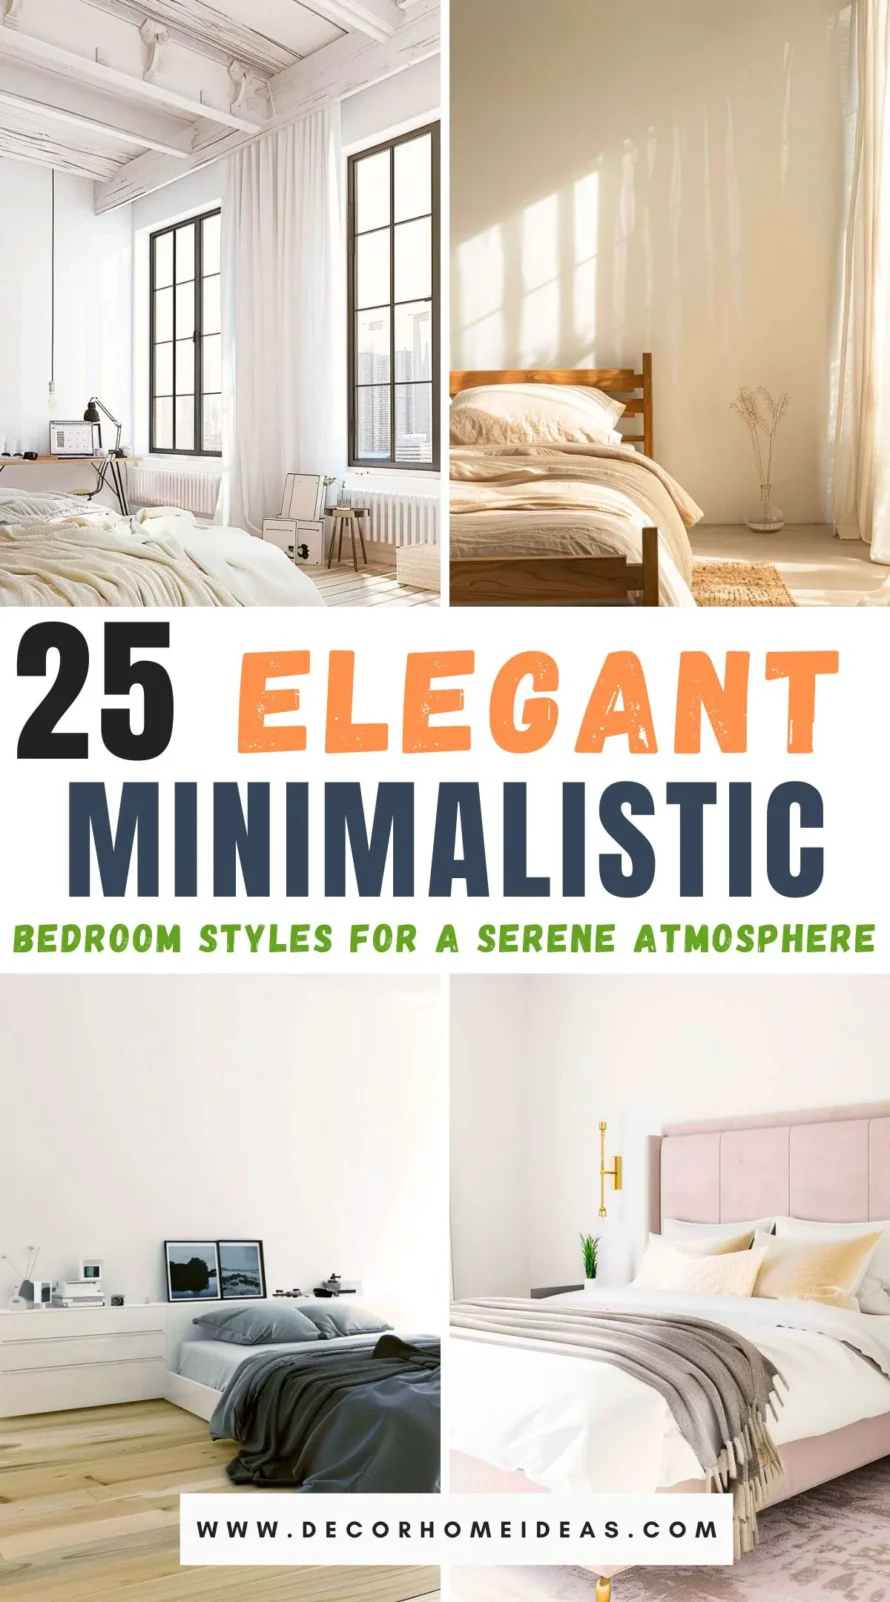 Discover 25 chic minimalistic bedroom styles designed to create a serene atmosphere in your home. From neutral color palettes to sleek furniture choices, this guide explores elegant and understated designs that promote relaxation and simplicity. 